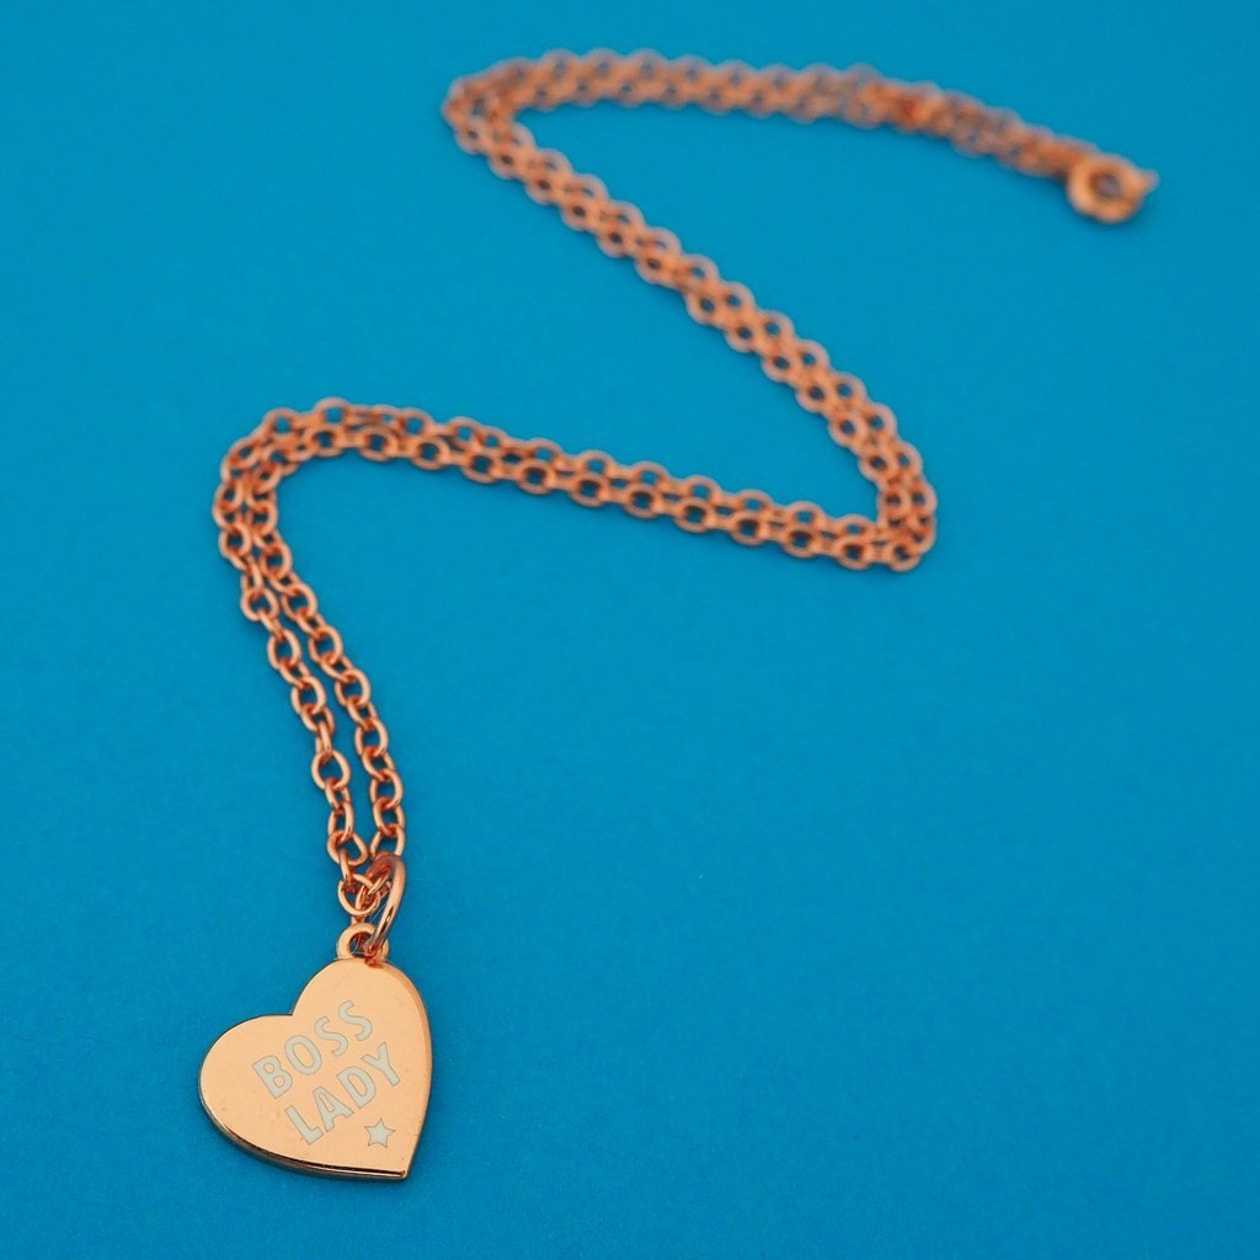 Boss Lady Rose Gold Heart Charm Necklace in Gift Box